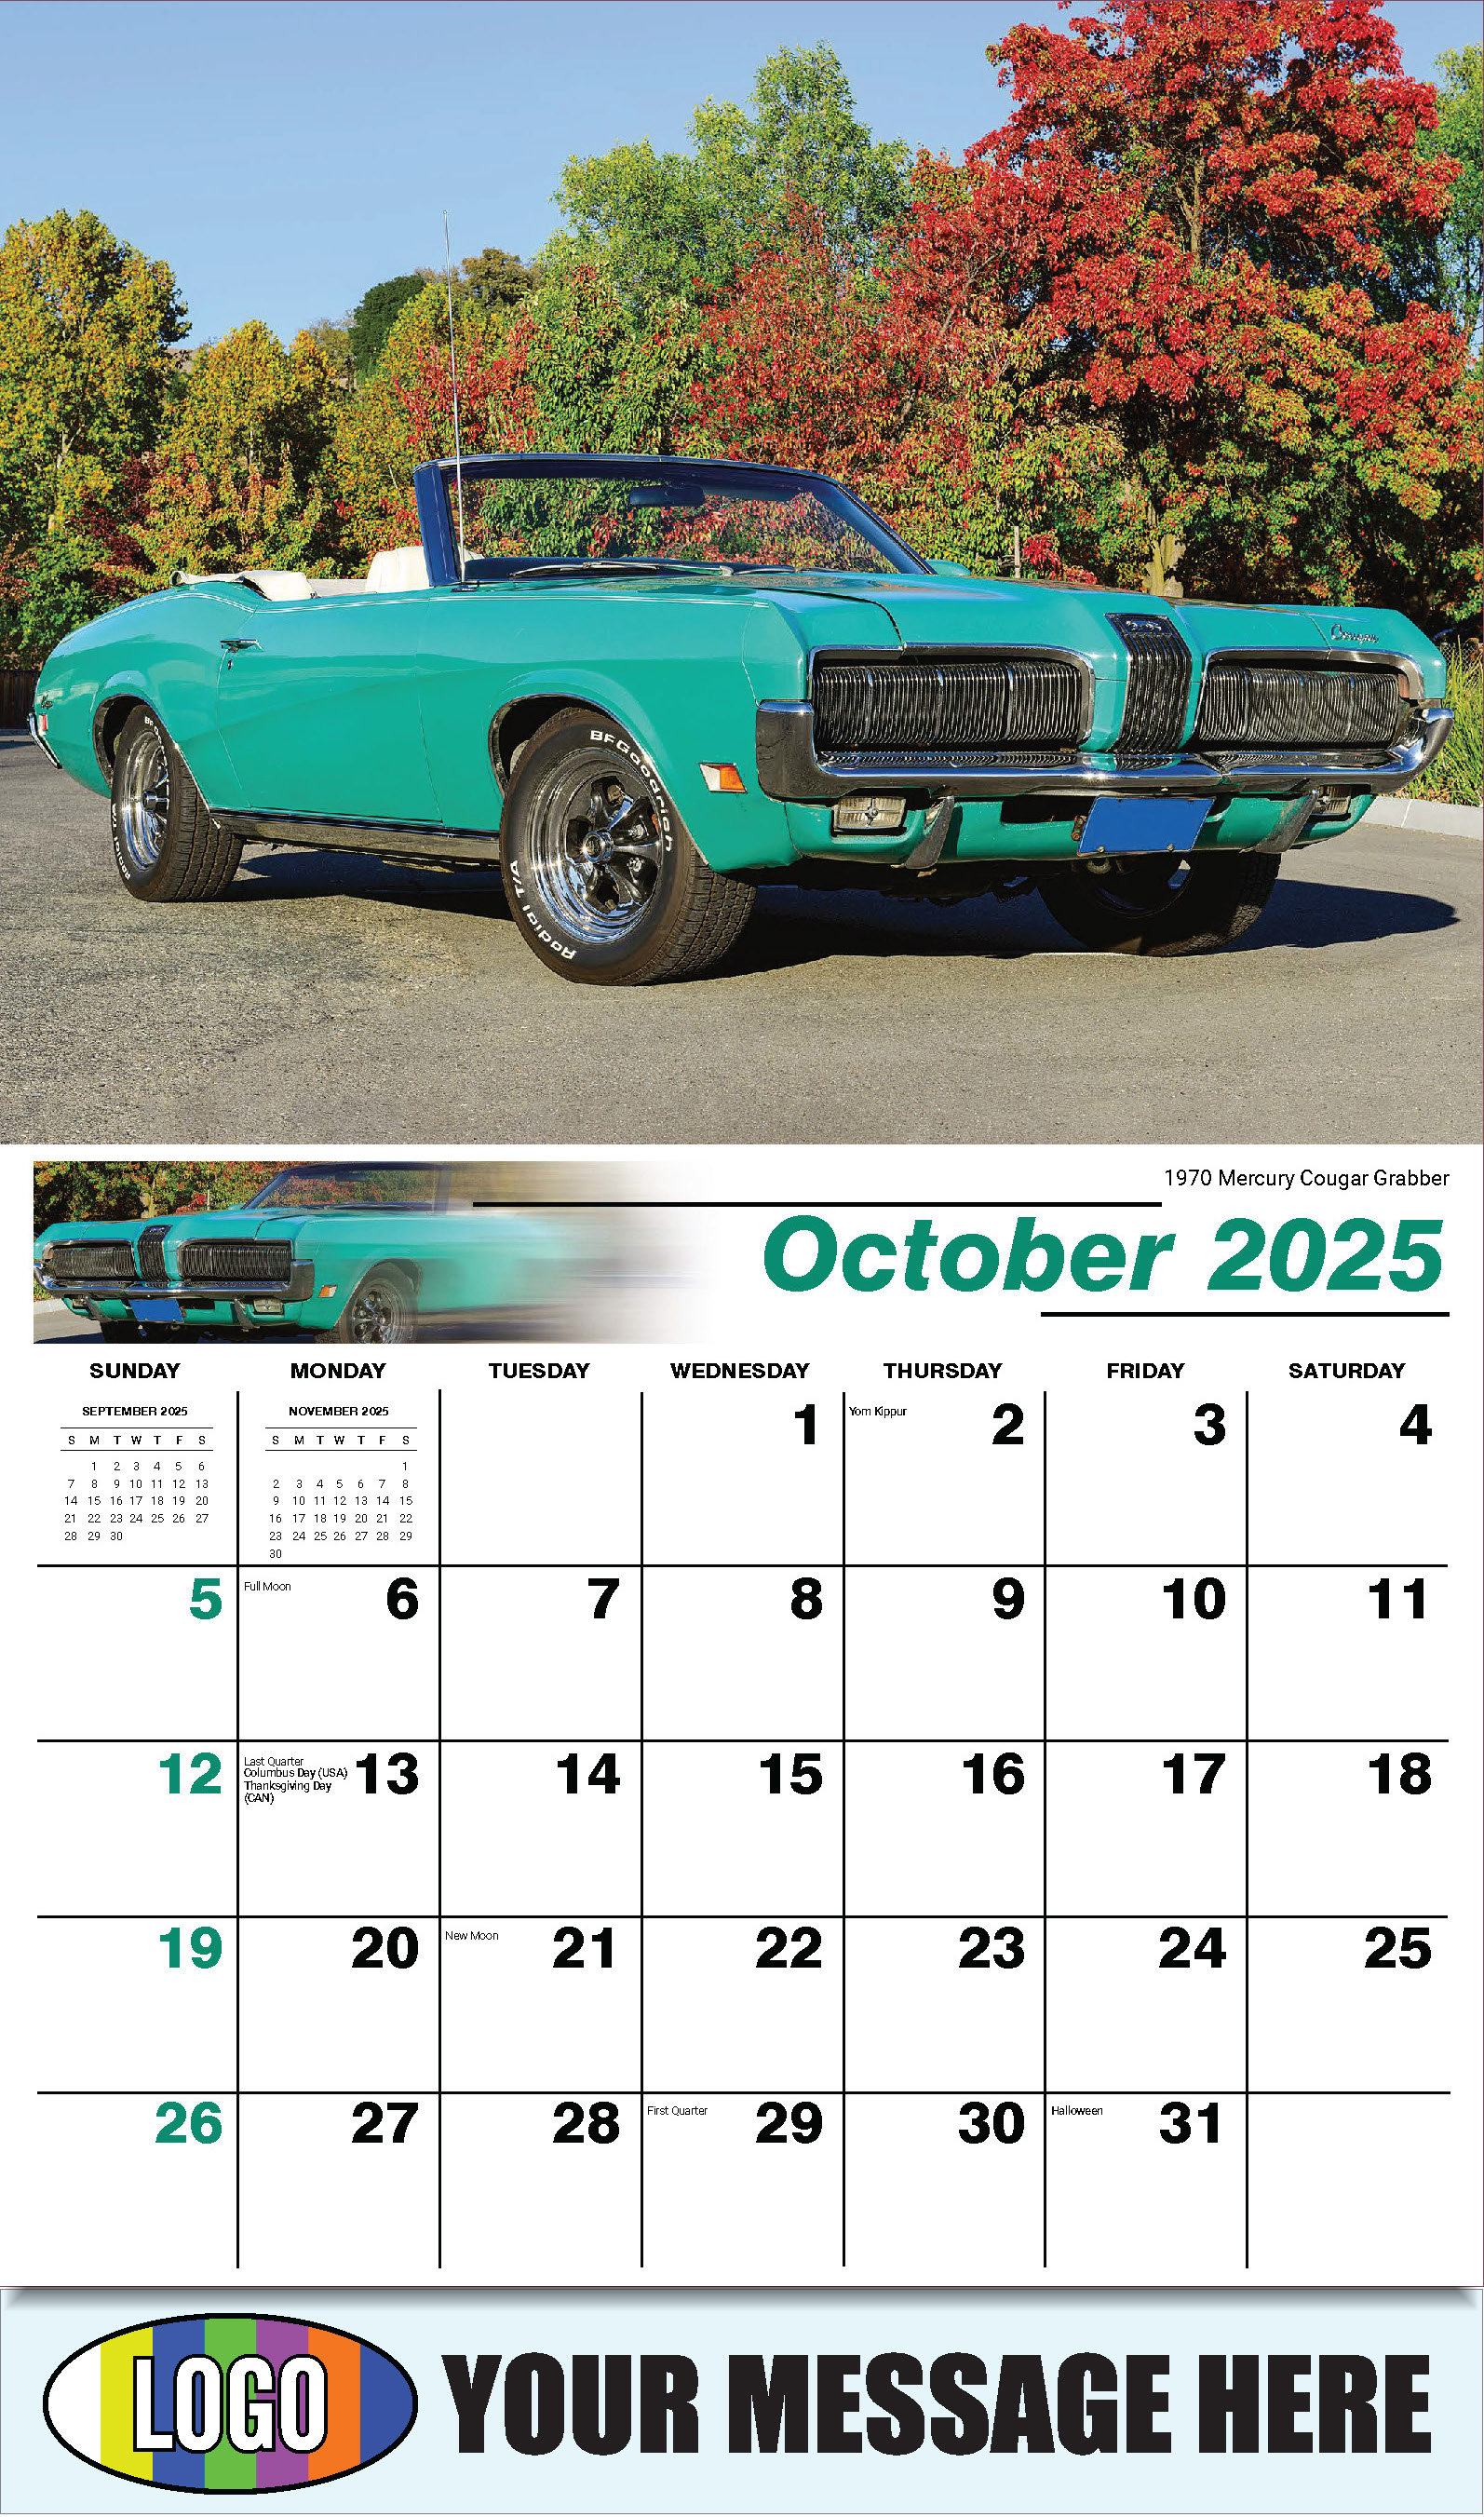 Henry's Heritage FORD Cars 2025 Automotive Business Promo Calendar - October